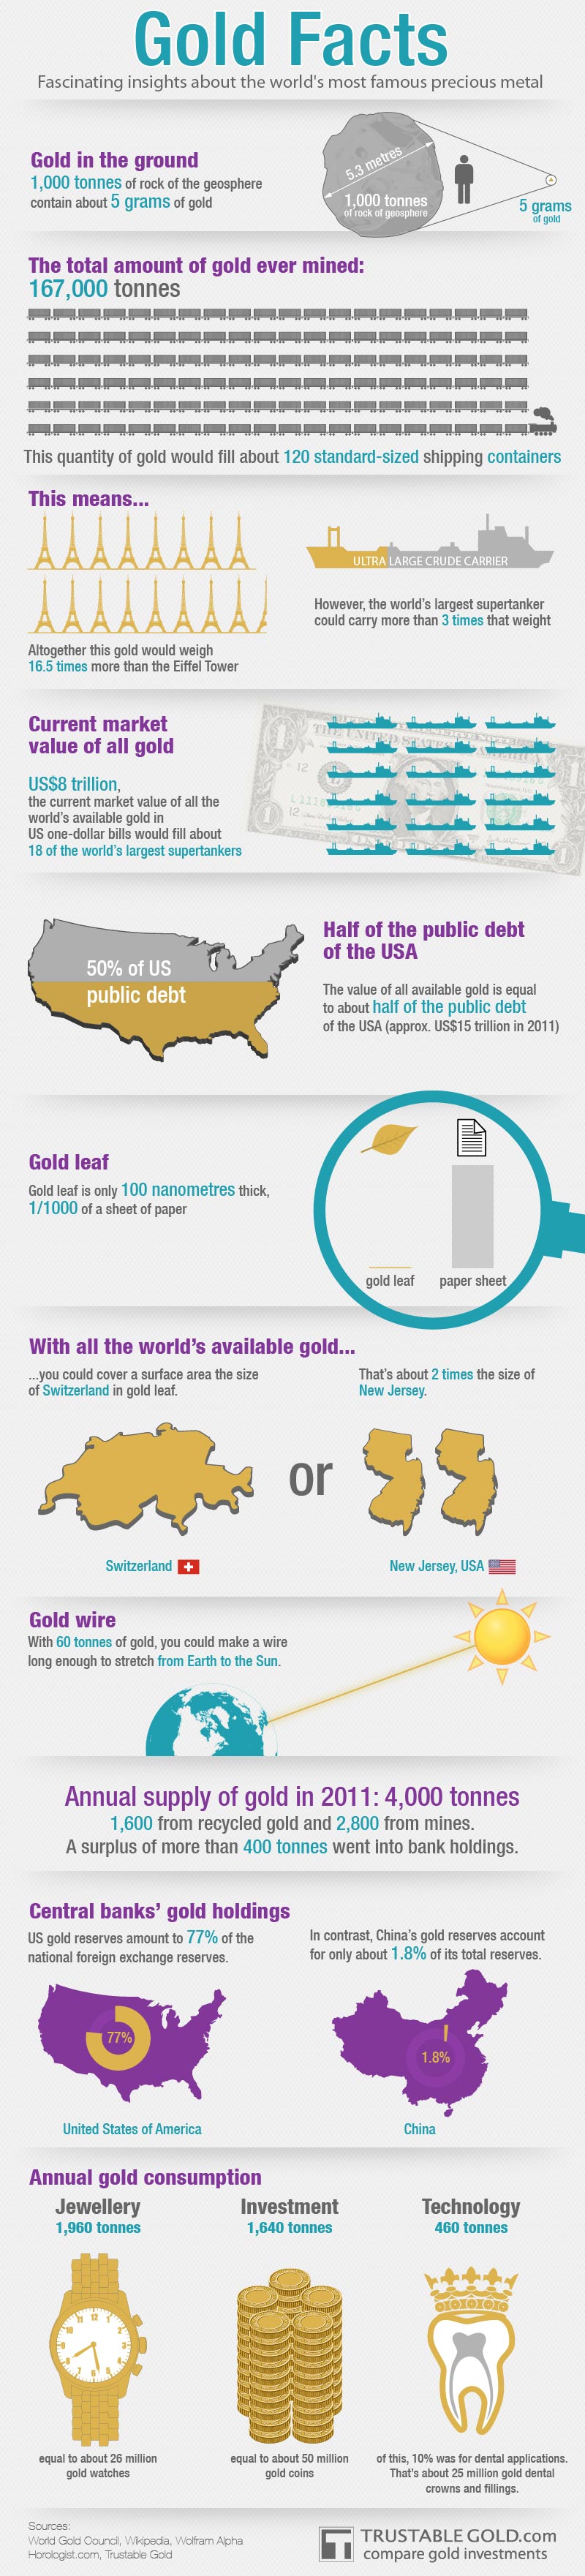 infographic-gold-facts.jpg